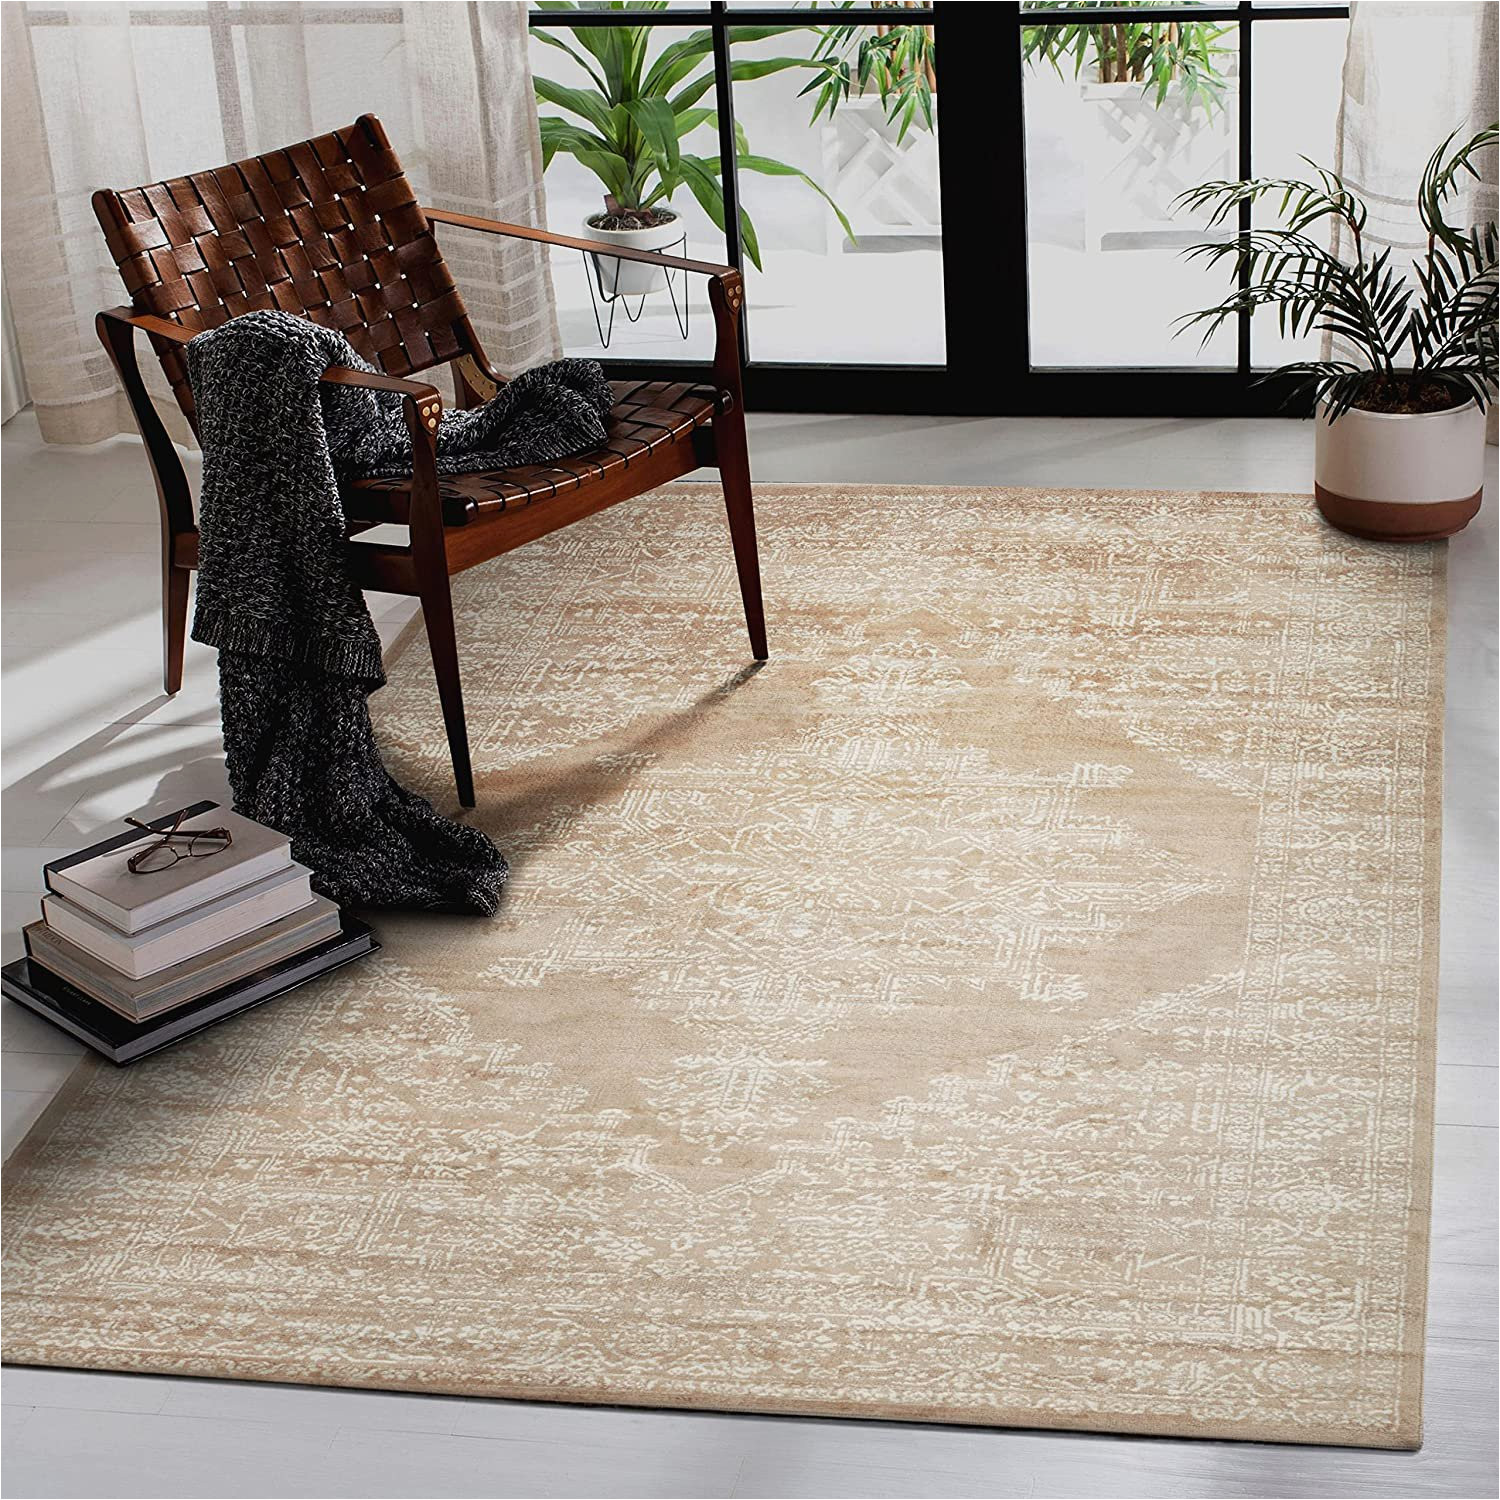 Extra Large Contemporary area Rugs Homeart Living Room Rug – Short Pile, Bordered, soft, area Carpet …